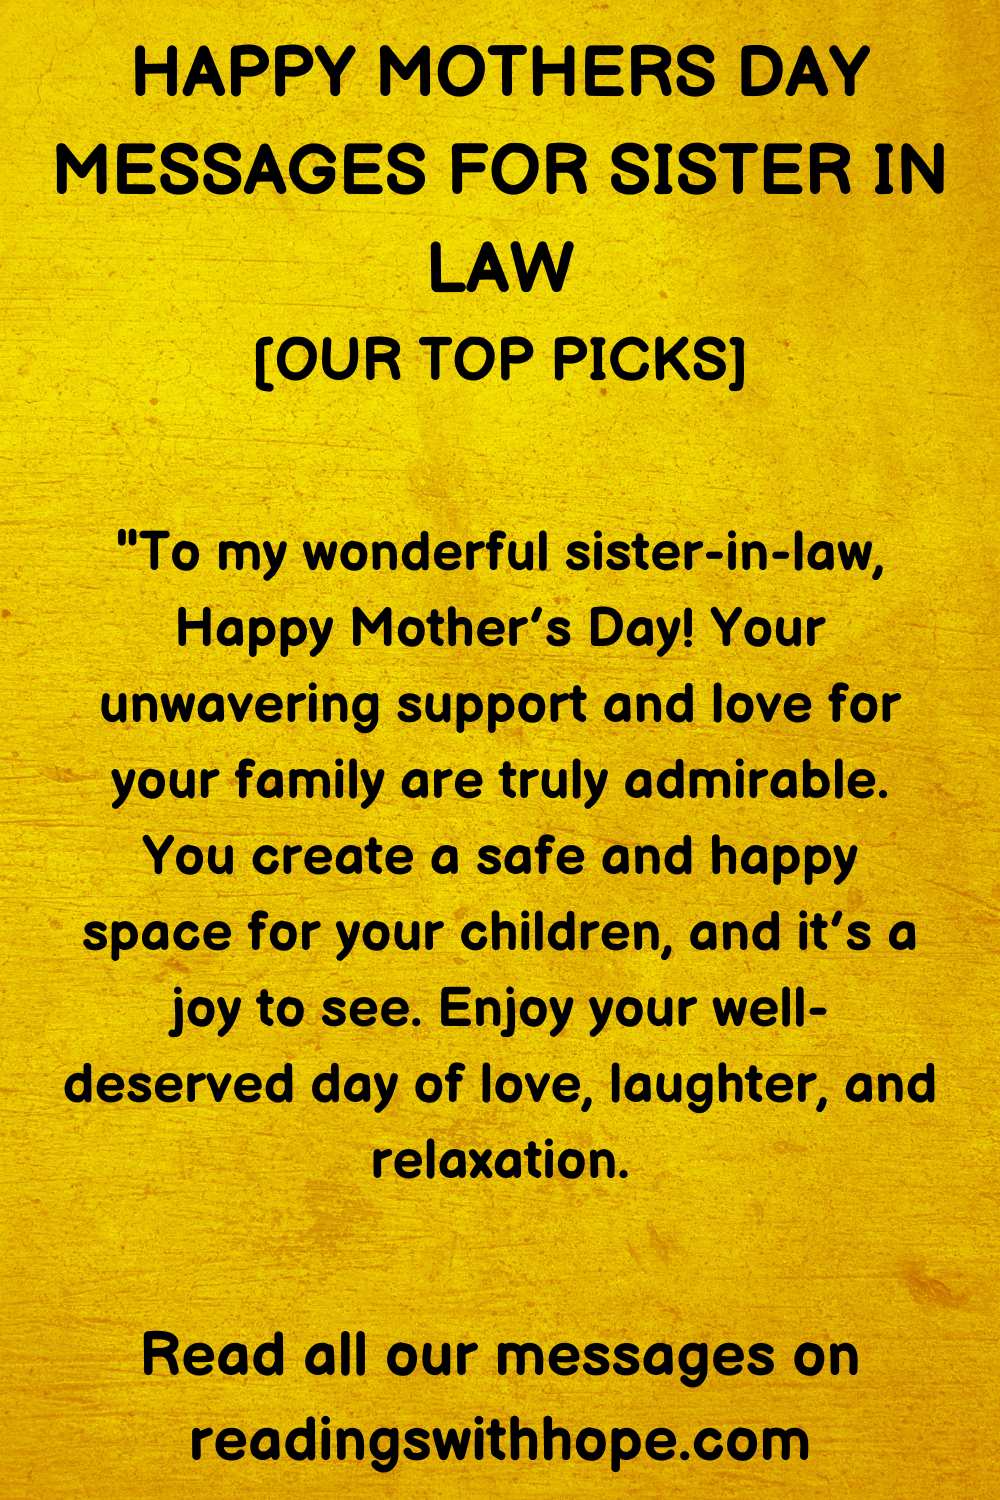 Happy Mothers Day Message for Sister
in law